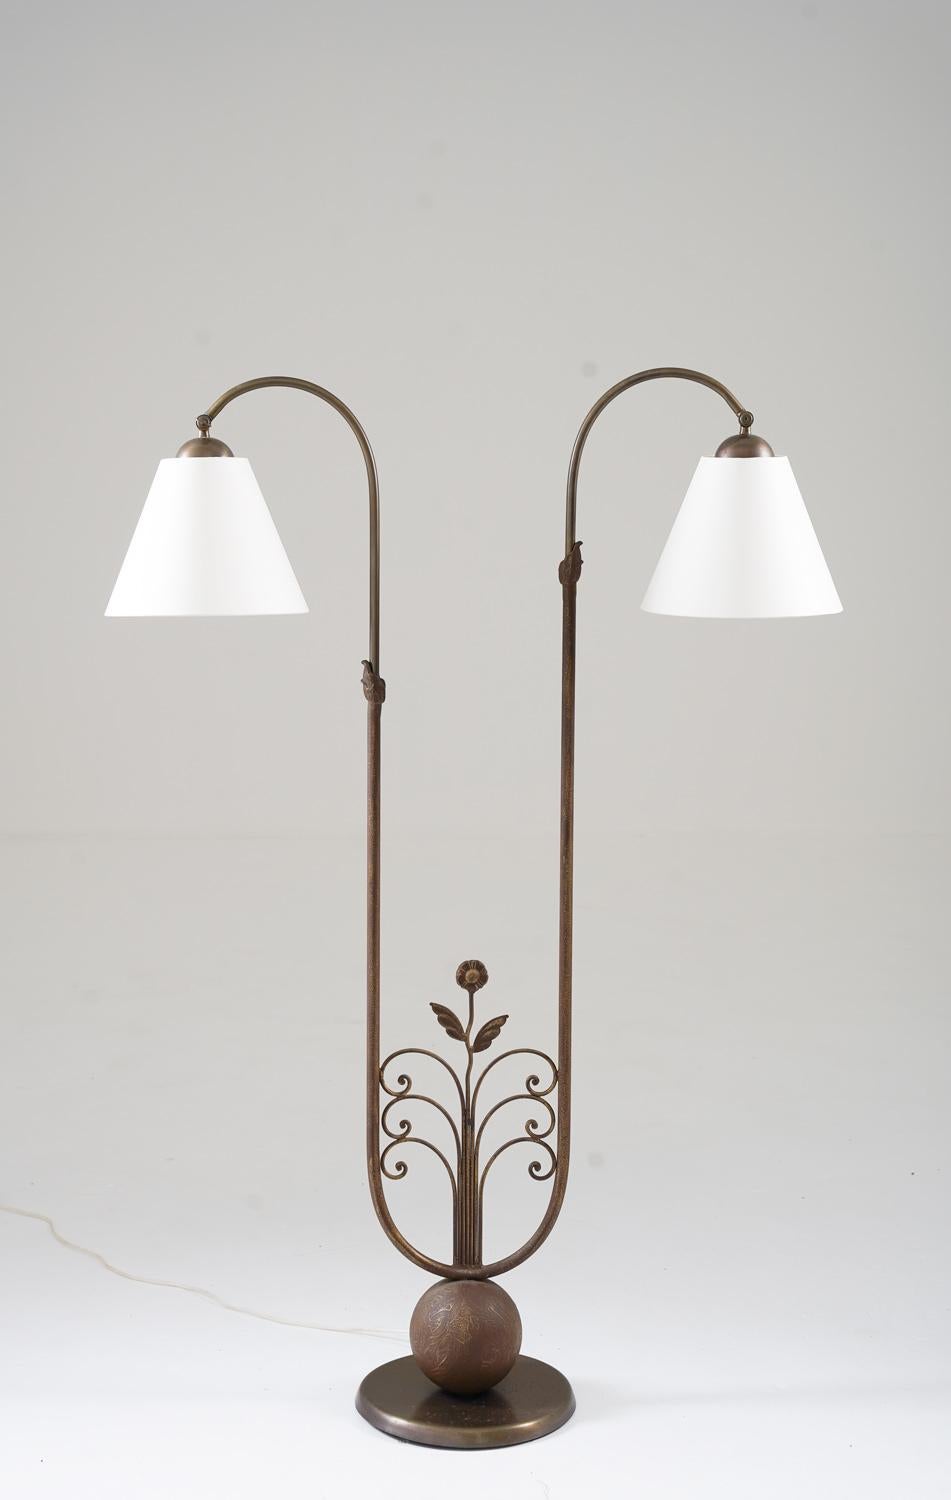 Rare floor lamp by Tor Wolfenstein for Ditzingers, Sweden, 1930s.
This spectacular floor lamp is an interesting example of Swedish design from the beginning of the modernist era, mixing organic shapes with floral ornaments and several different